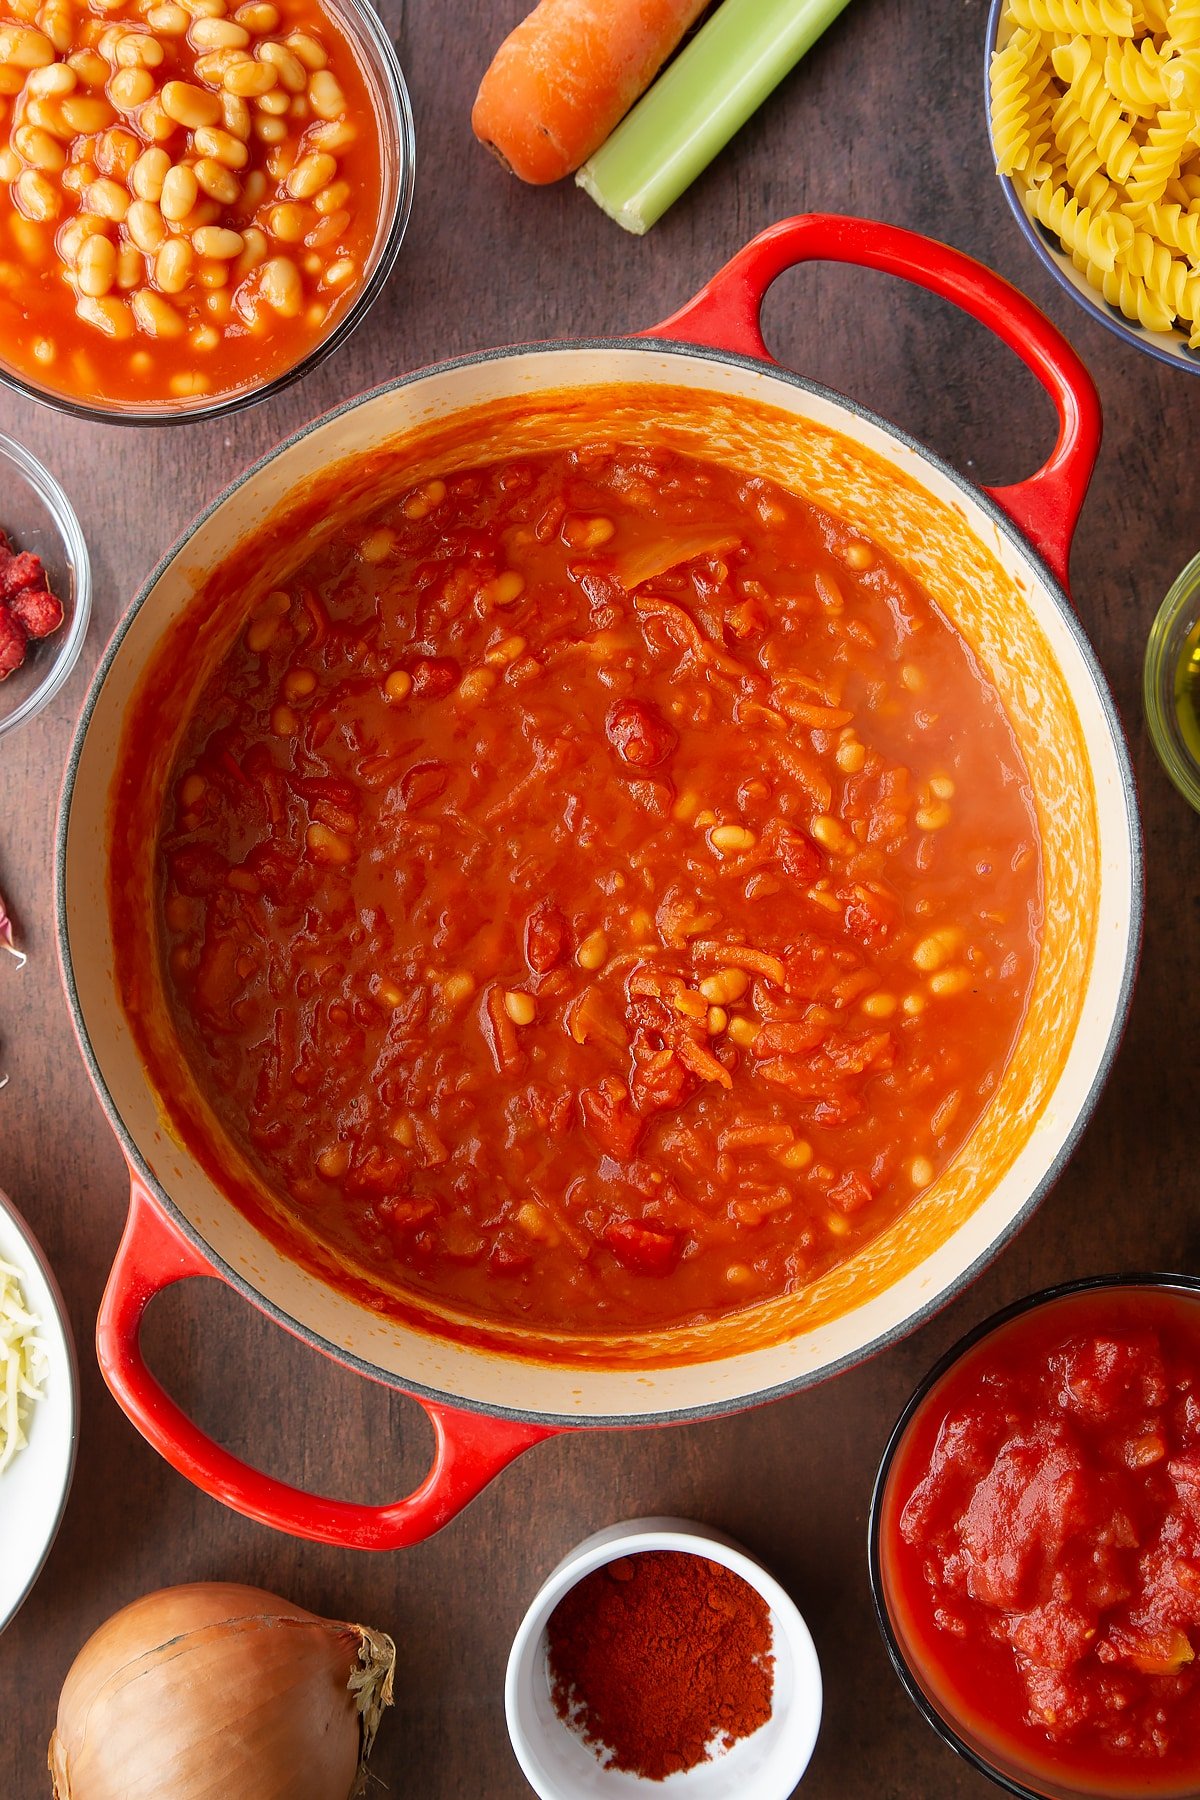 Grated veg, baked beans, tomatoes, tomato puree and paprika simmered down in a saucepan. Ingredients to make pasta and baked beans surround the pan.